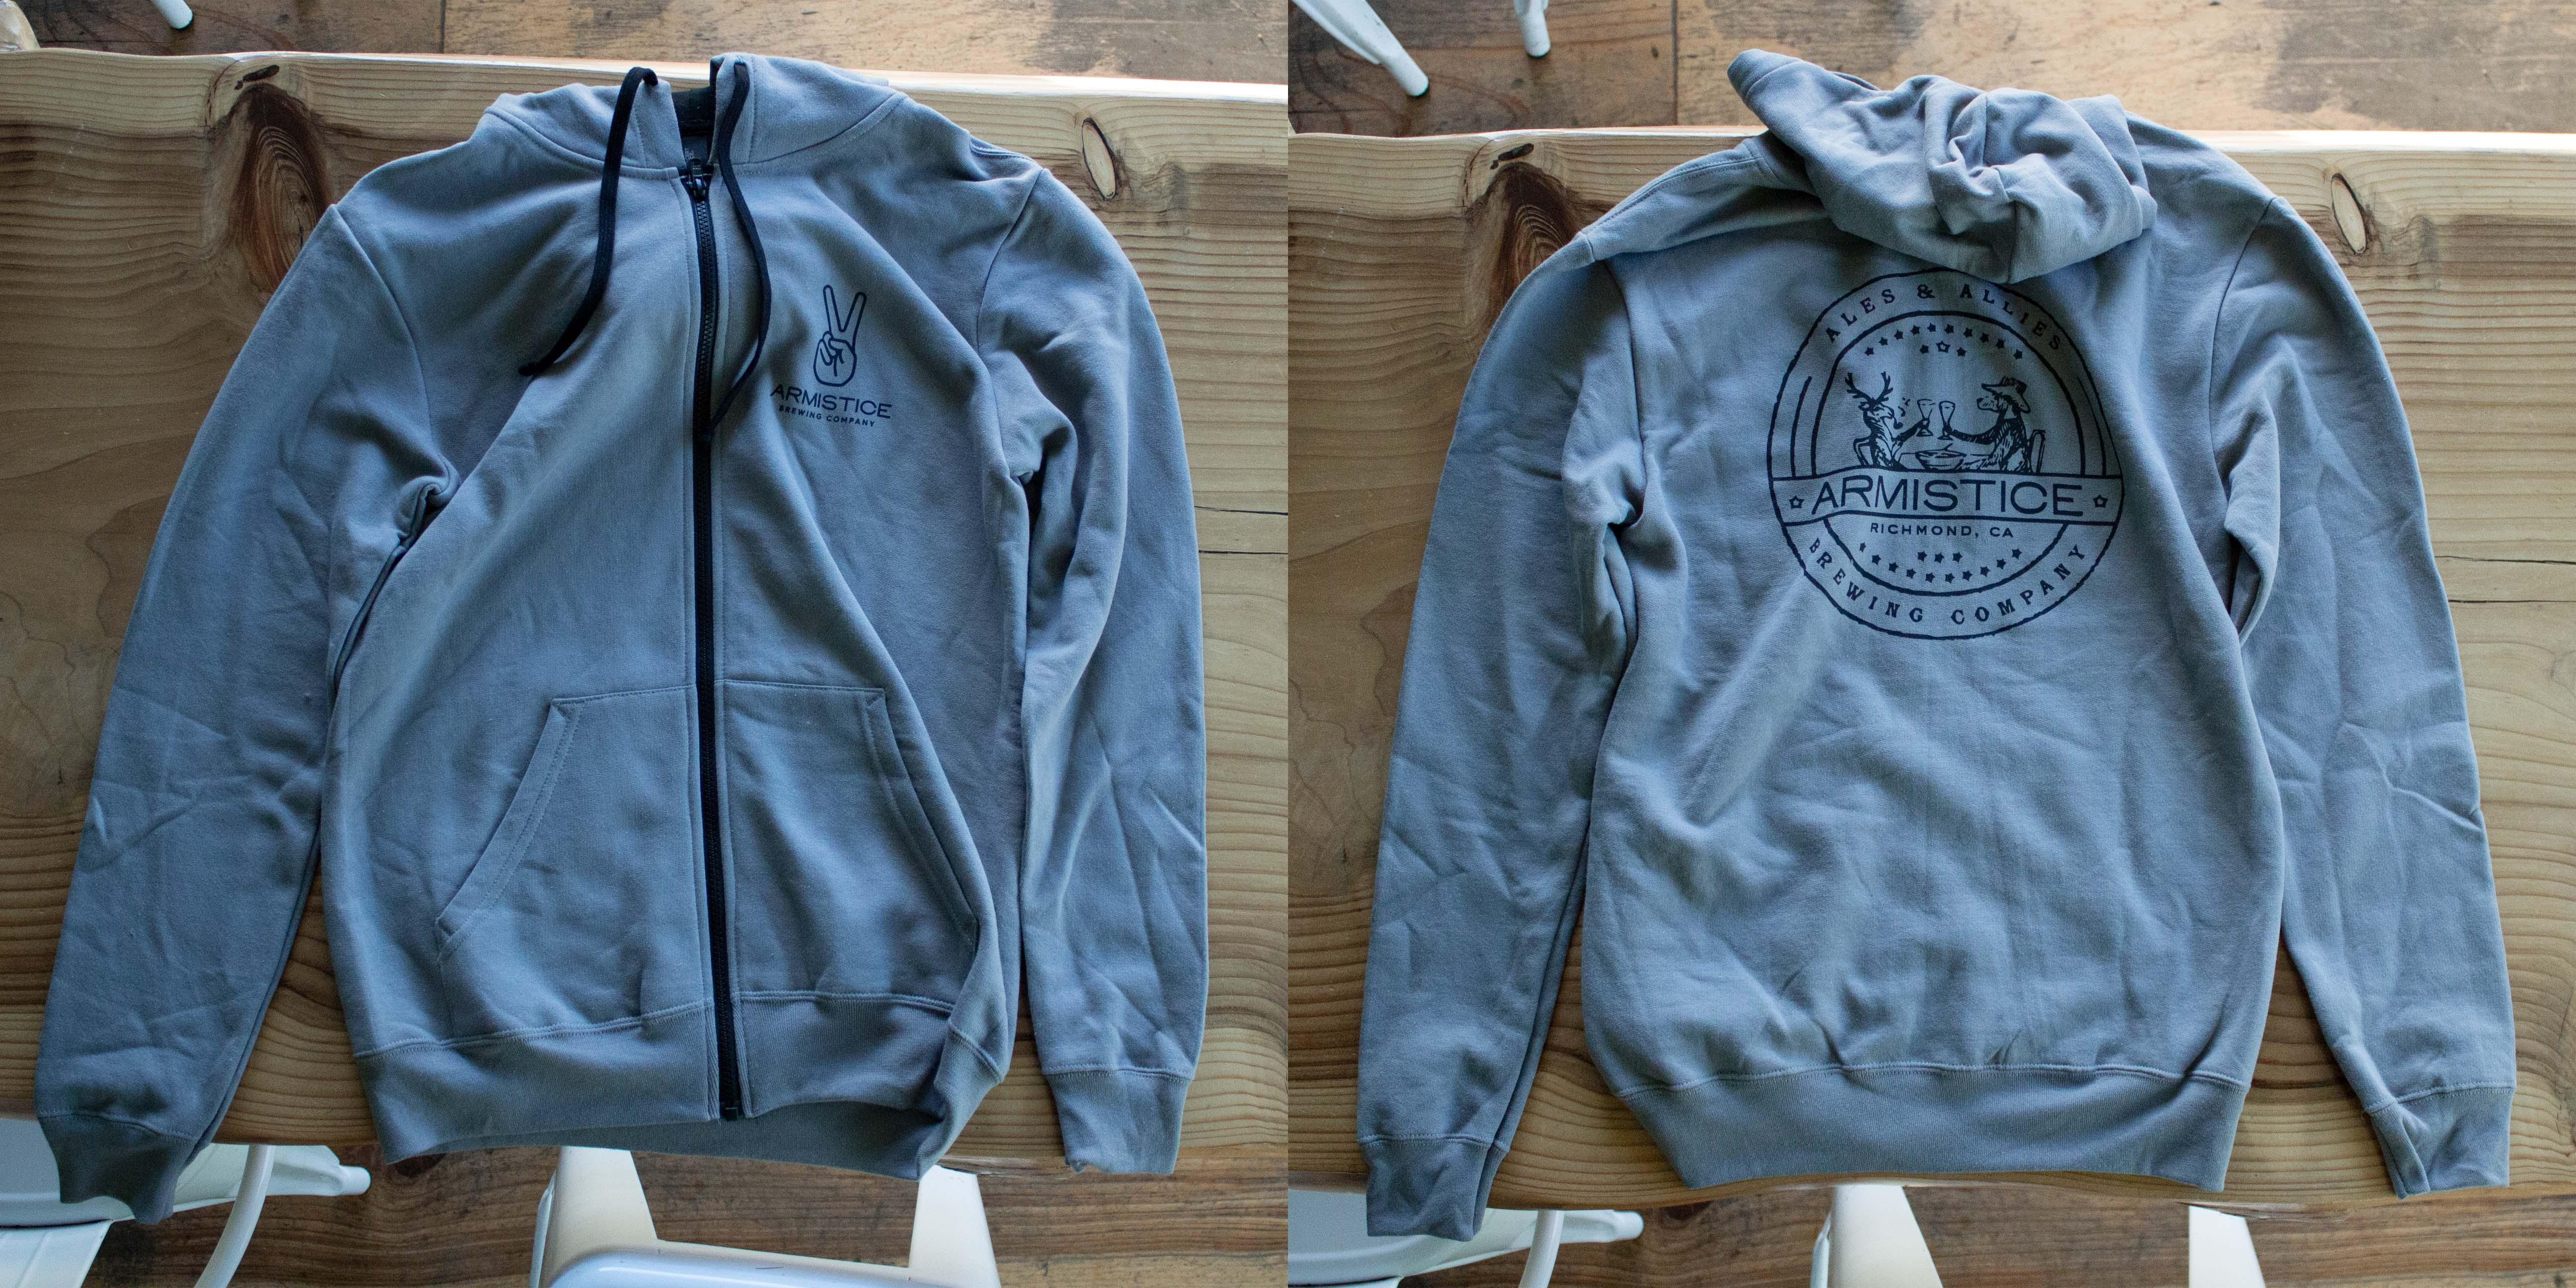 Grey is the New Black Goes With Everything Zip Hoodie